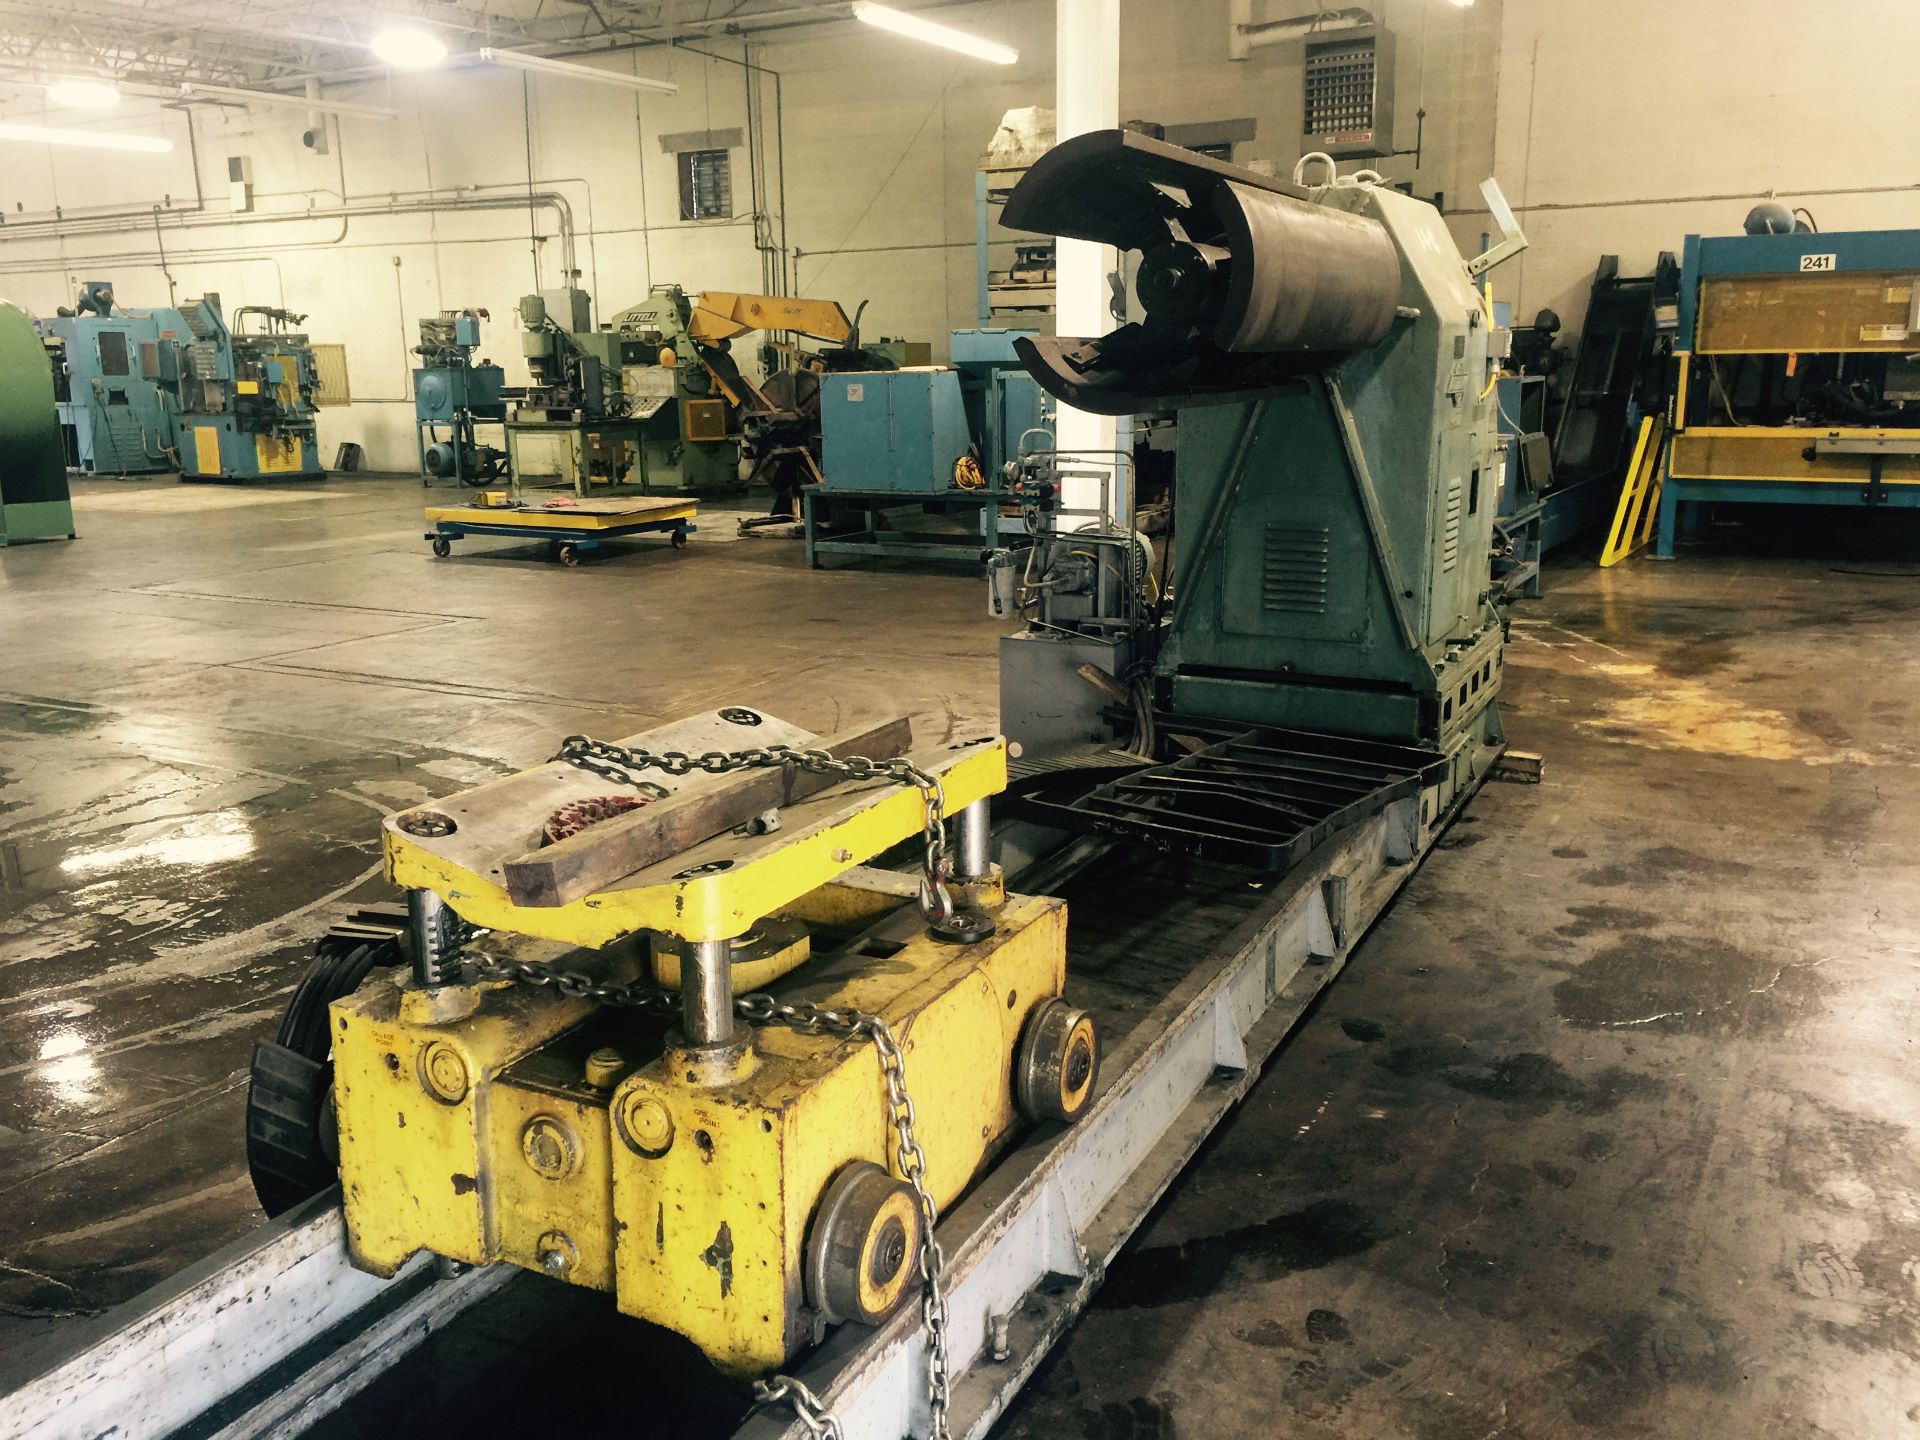 Littel Reel and coil car re-mfg 30,000 lb. capacity - Image 5 of 5